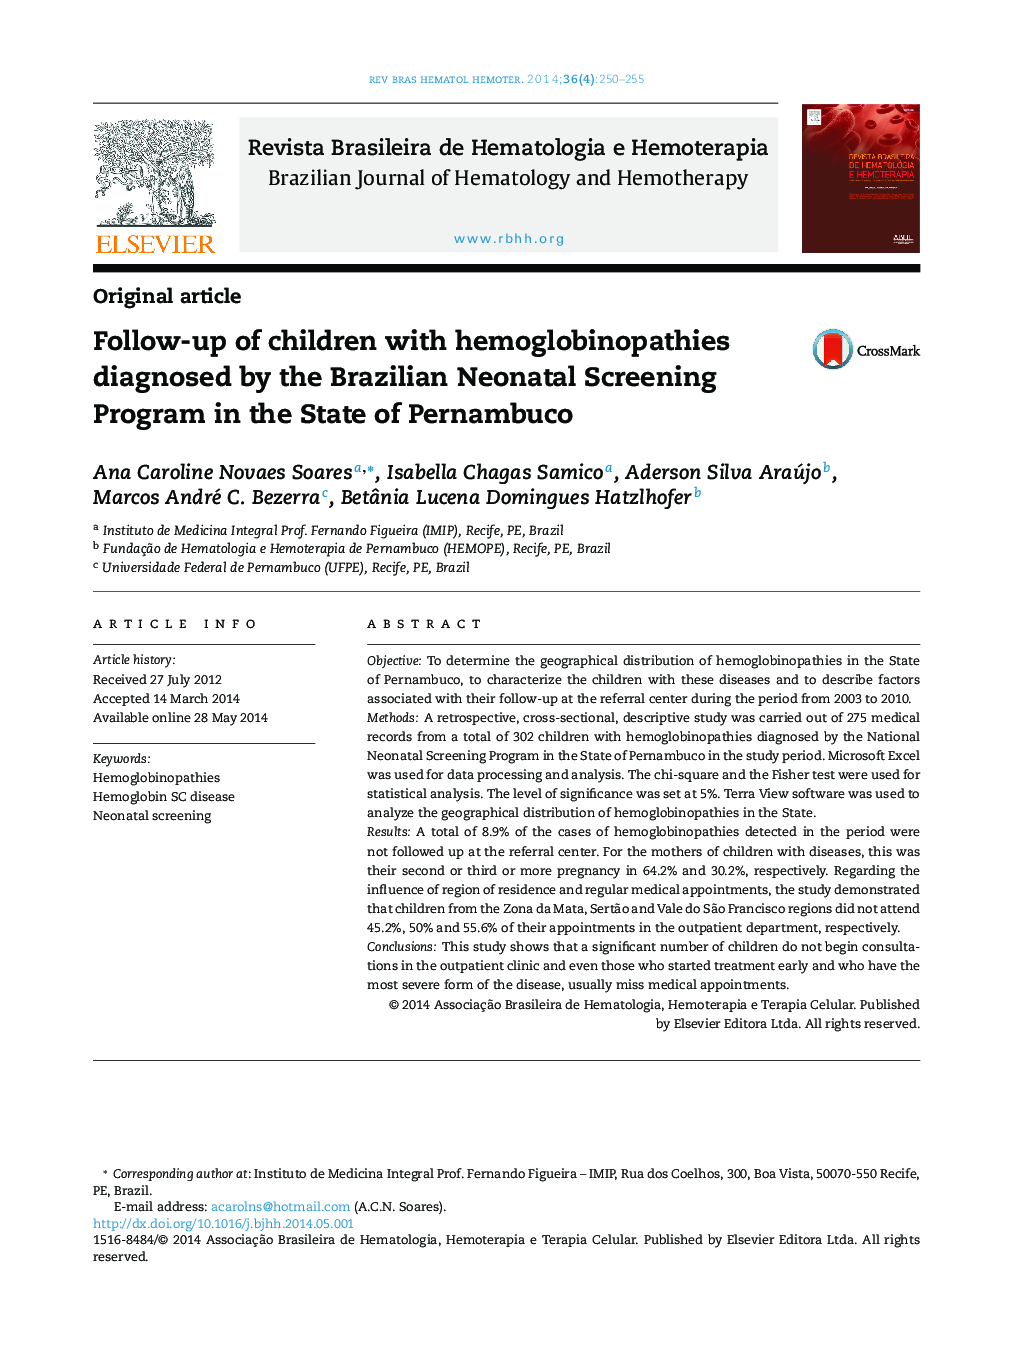 Follow-up of children with hemoglobinopathies diagnosed by the Brazilian Neonatal Screening Program in the State of Pernambuco